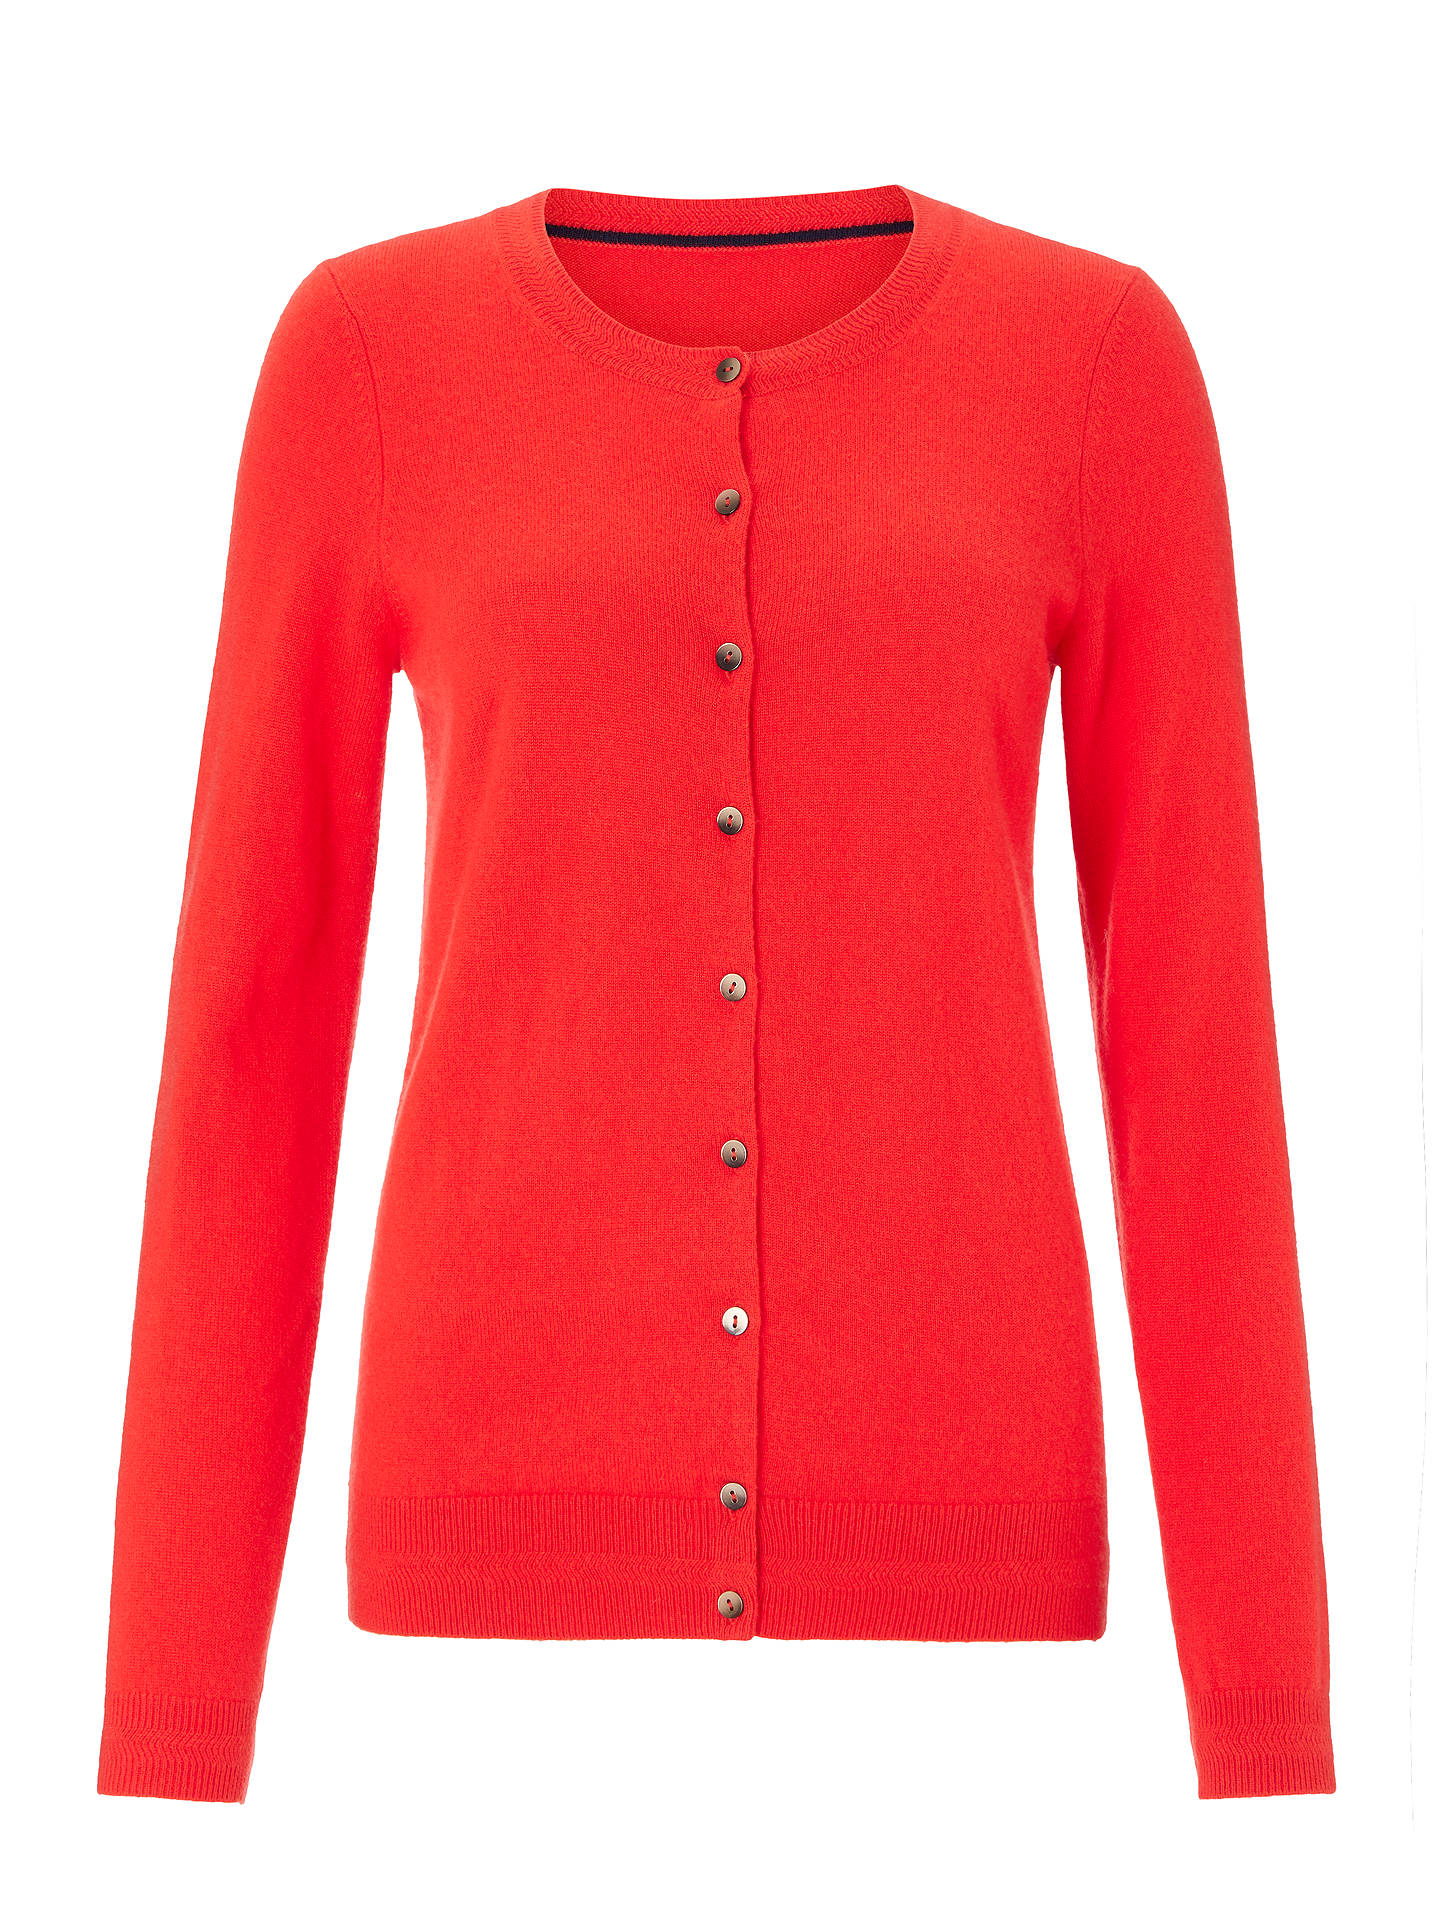 Boden Cashmere Crew Cardigan, Pop Red at John Lewis & Partners